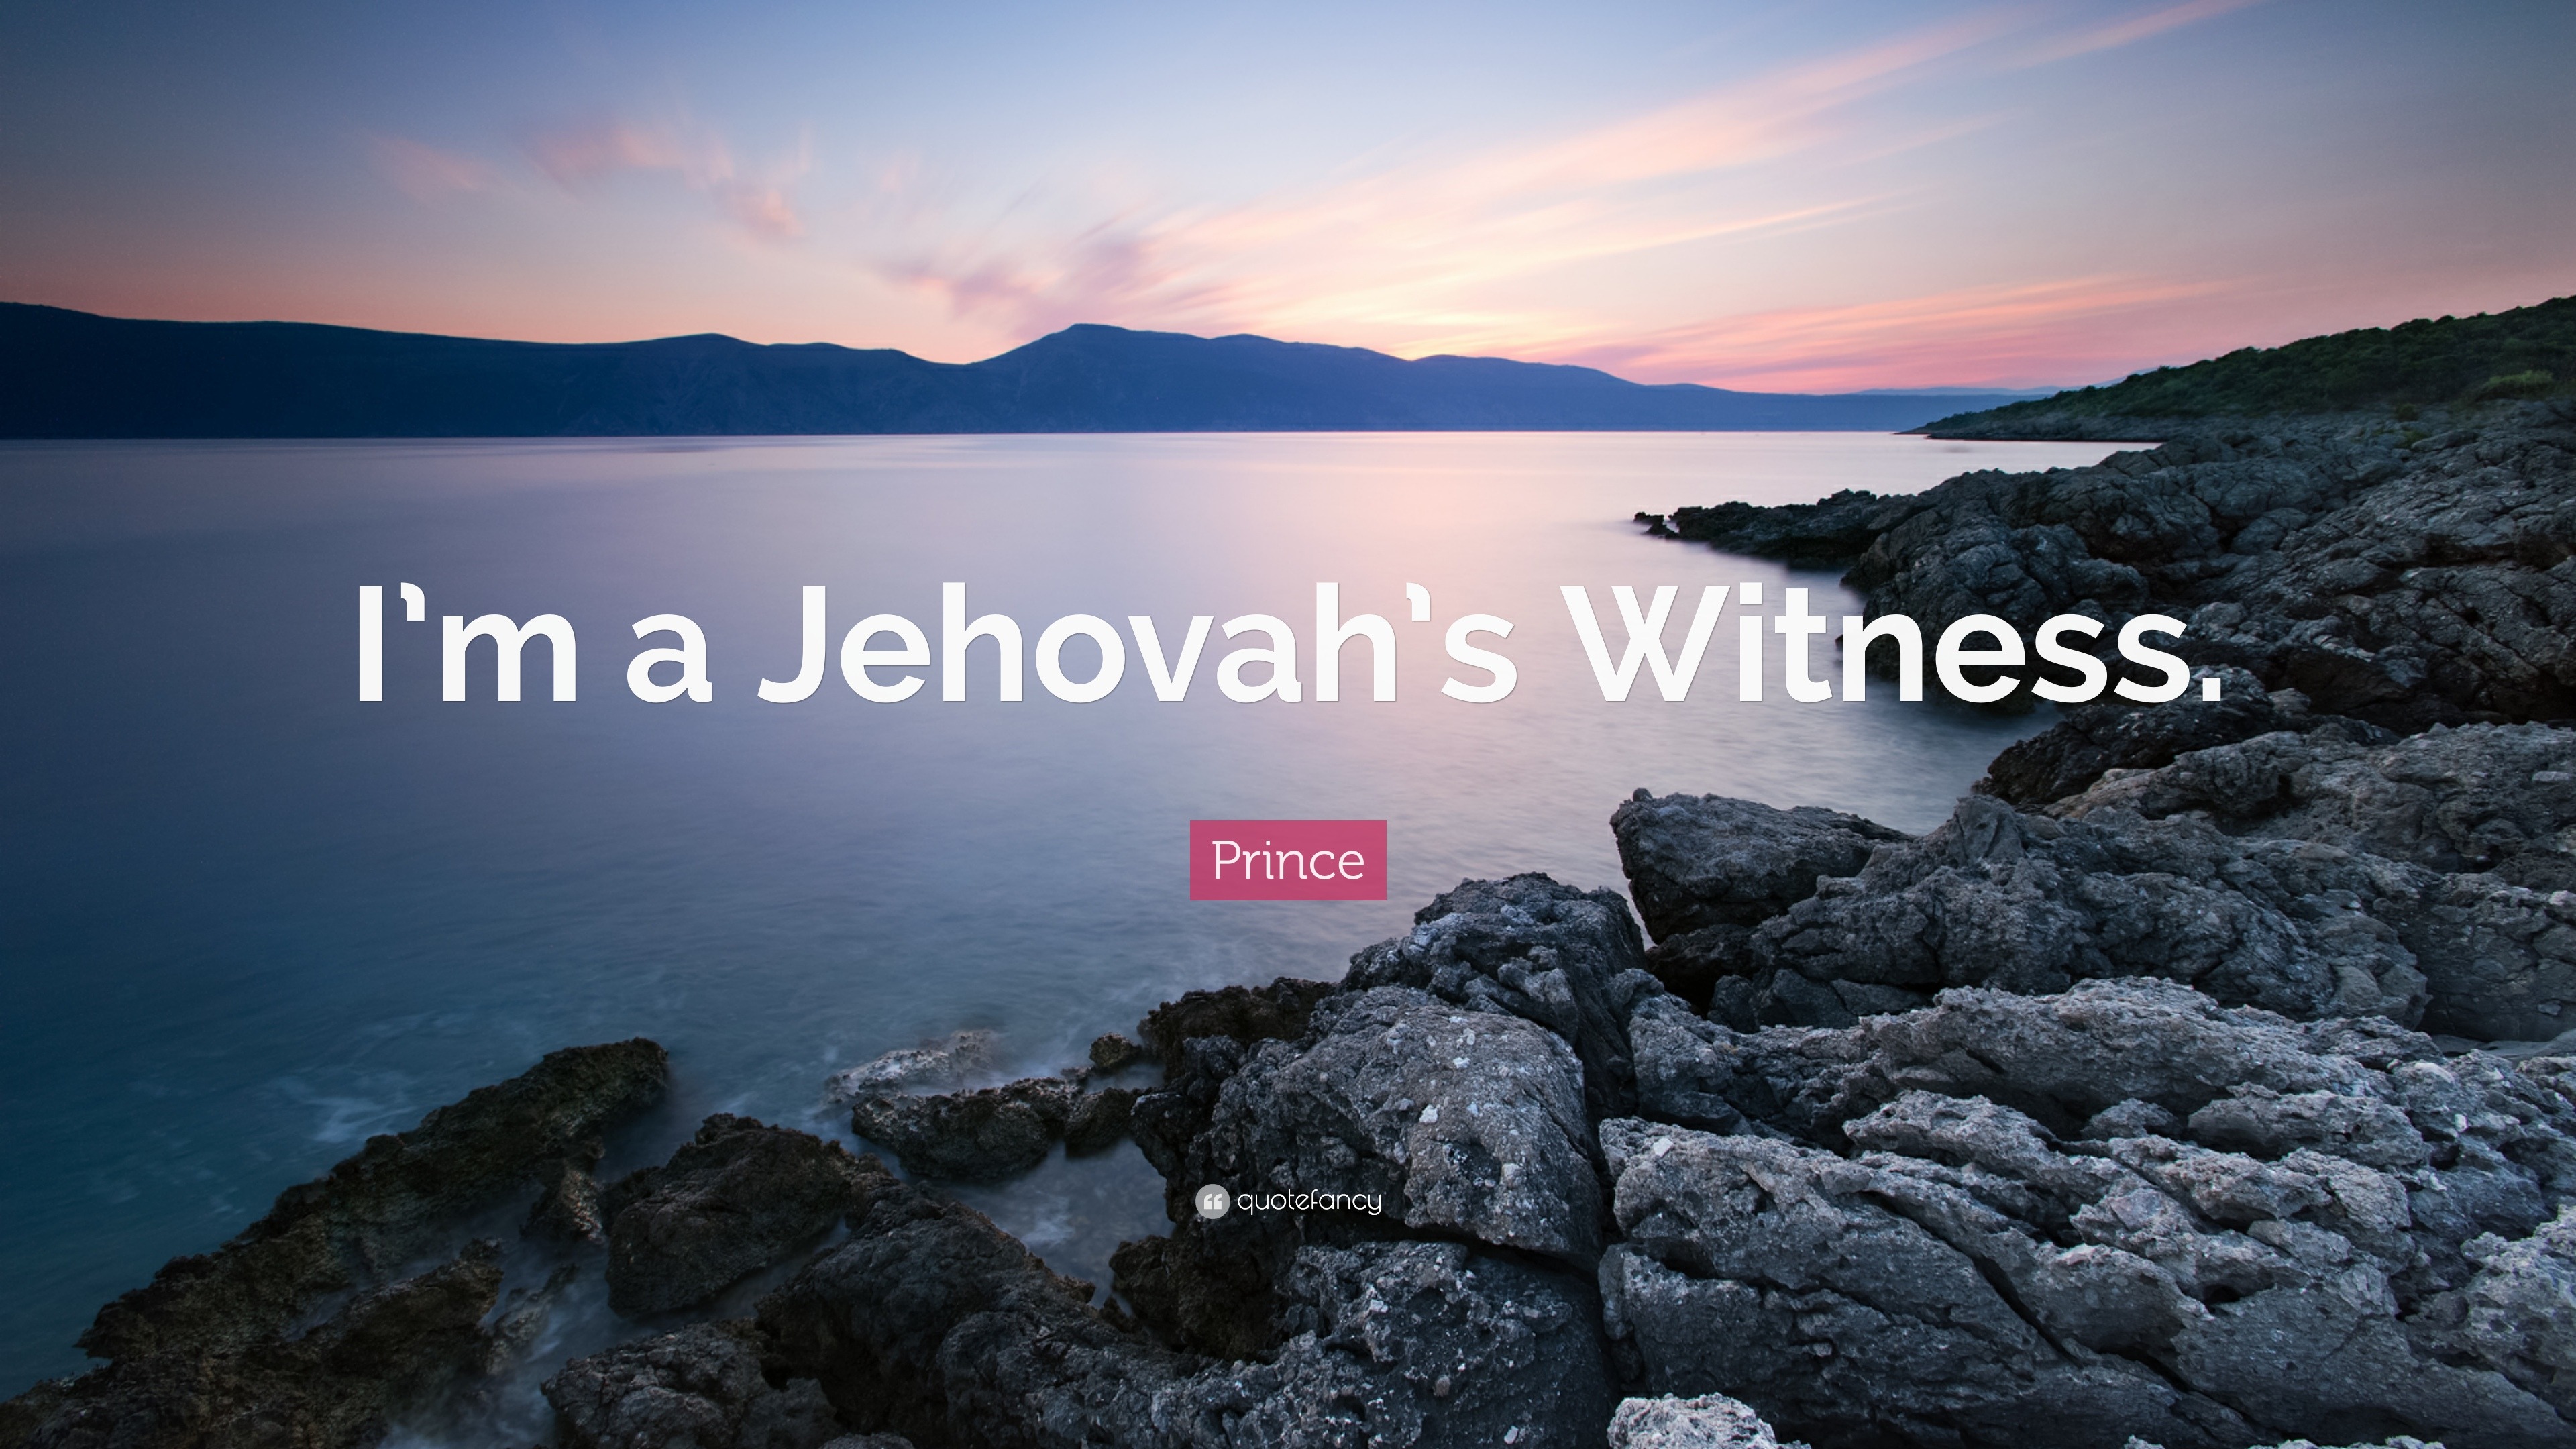 Prince Quote: “I'm a Jehovah's Witness.”